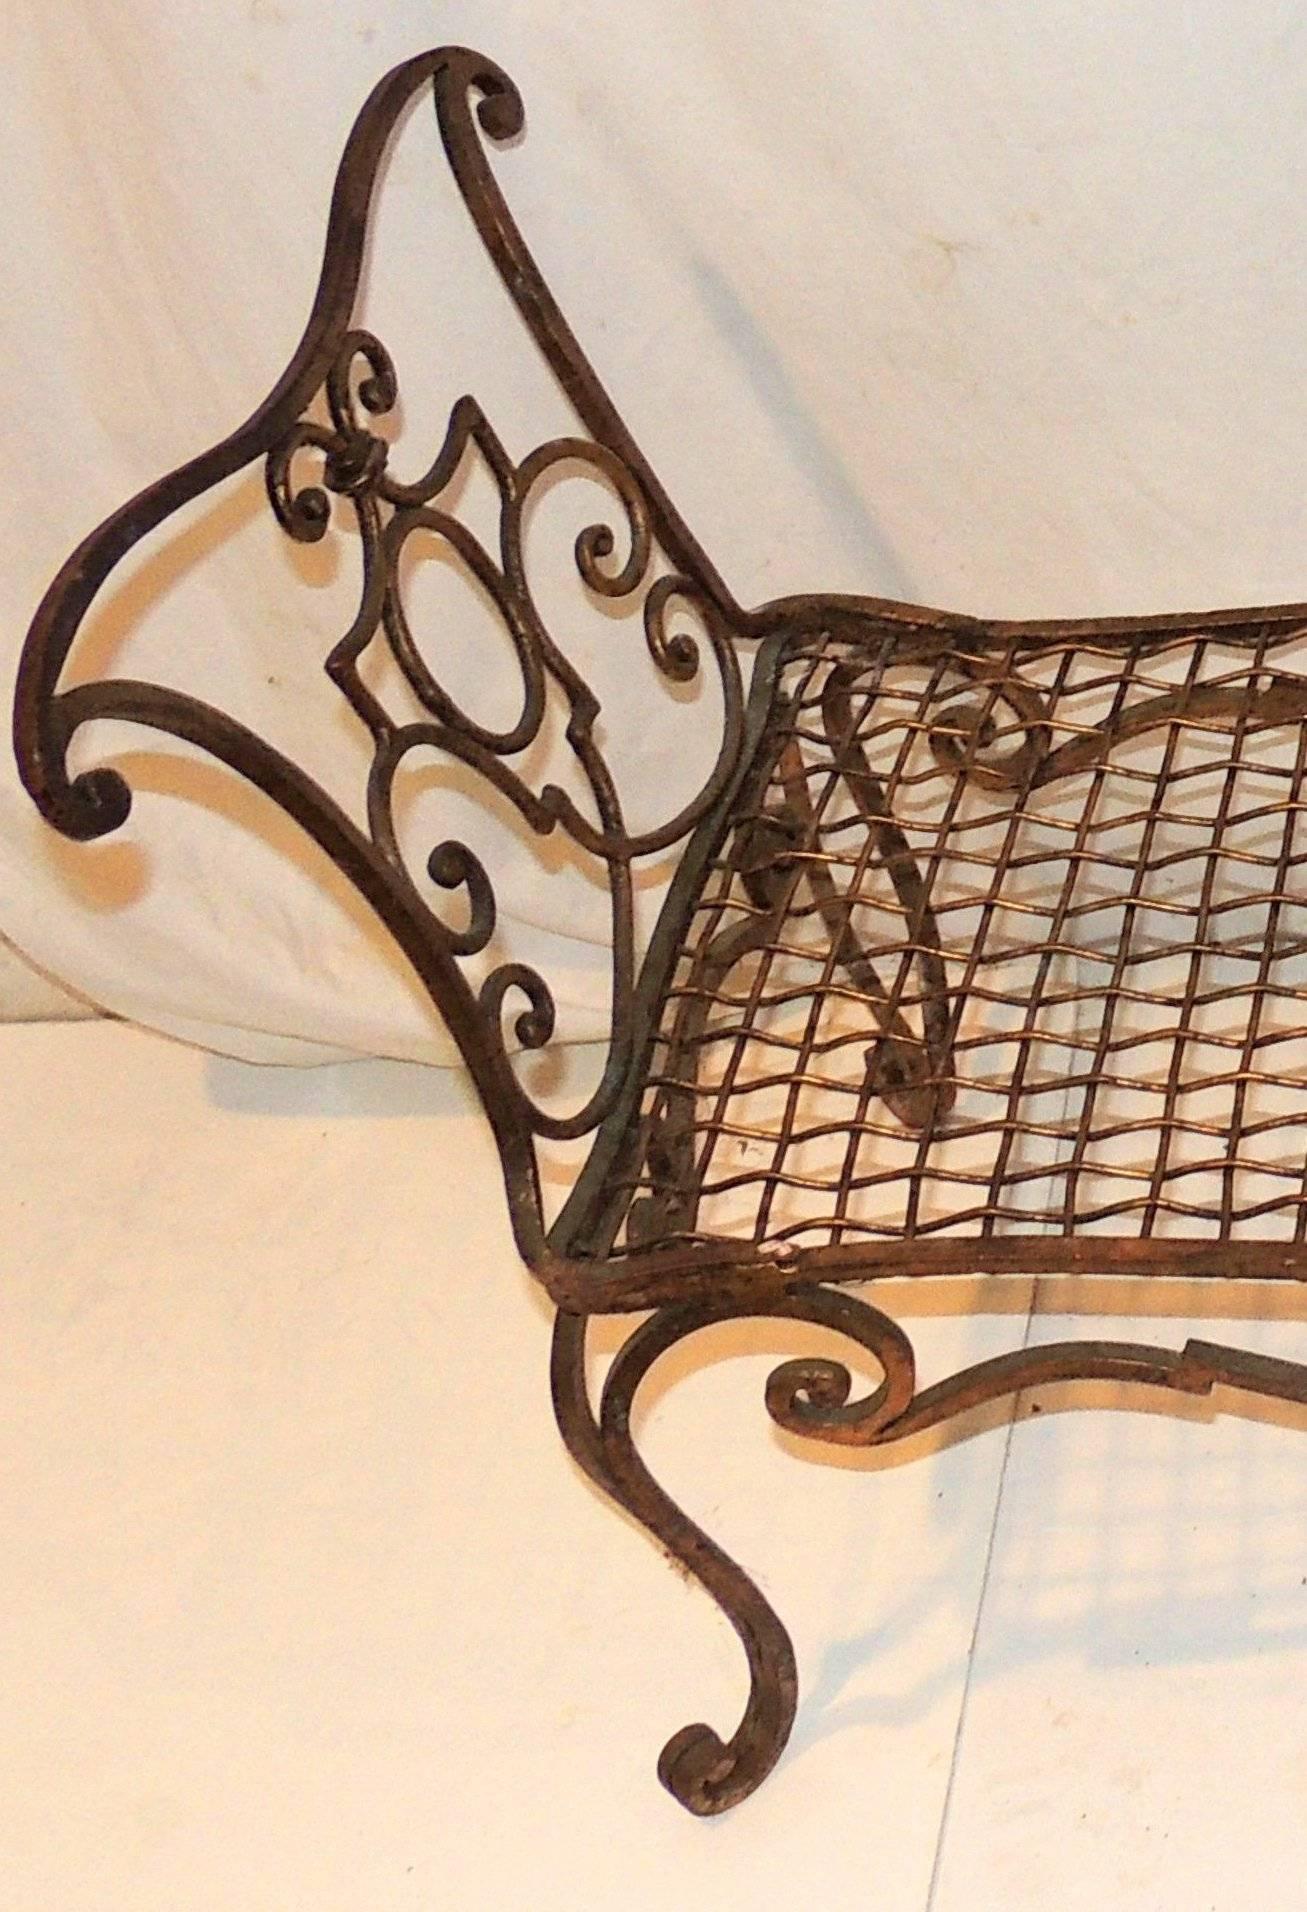 A wonderful French Jean Charles gilt wrought iron Baguès style bench with lattice seat and scrolled arms.
Measures: 13